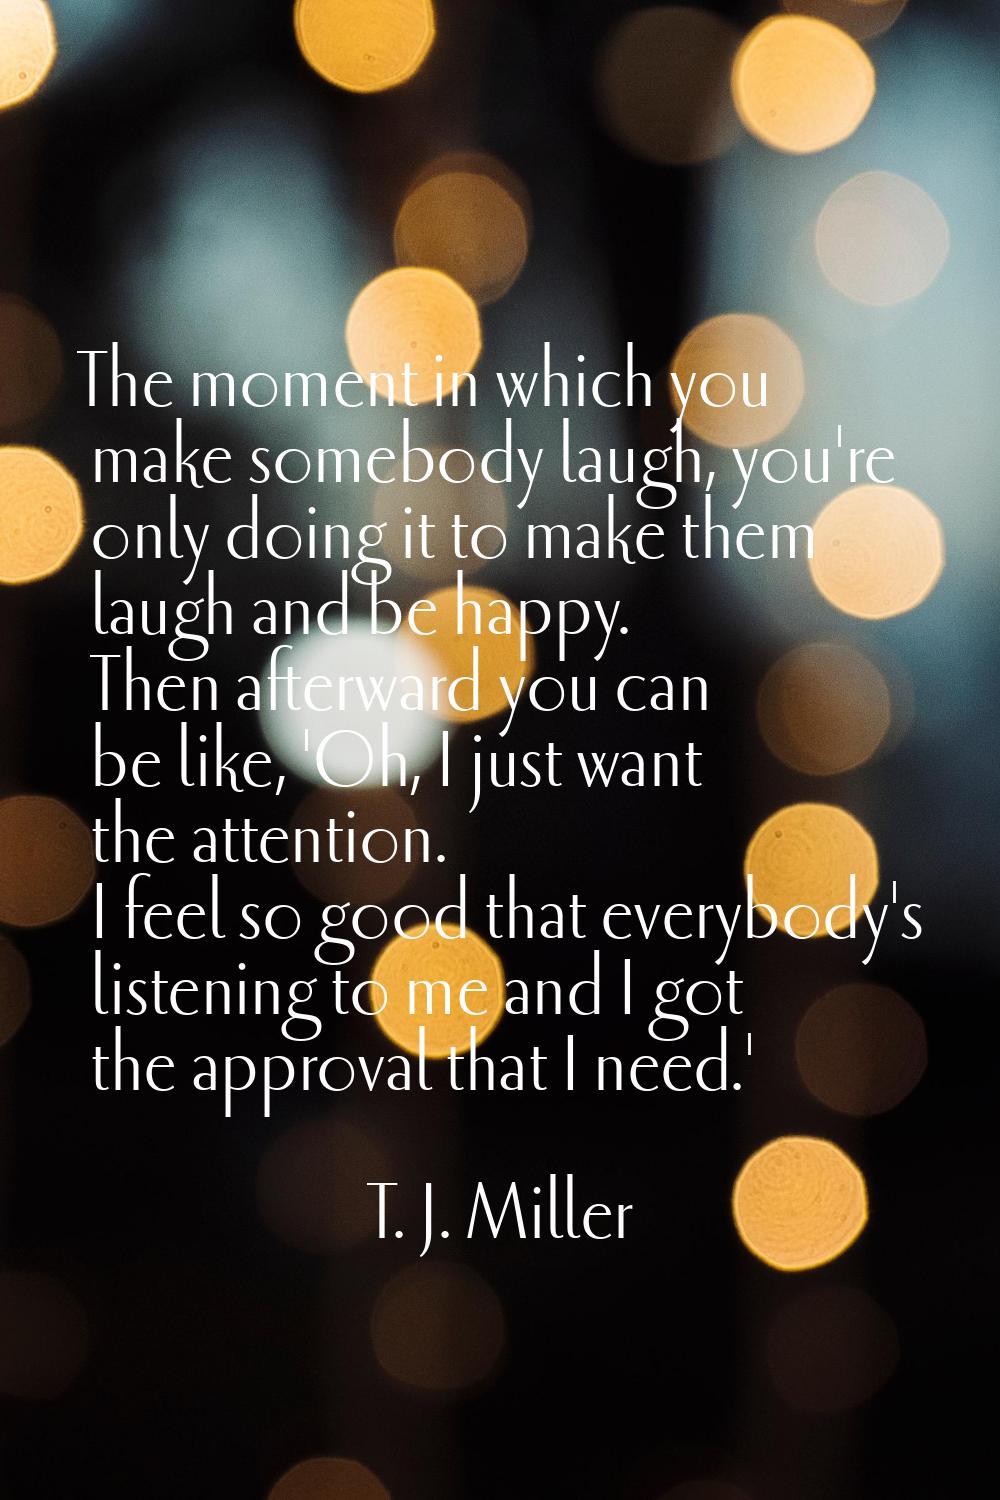 The moment in which you make somebody laugh, you're only doing it to make them laugh and be happy. 